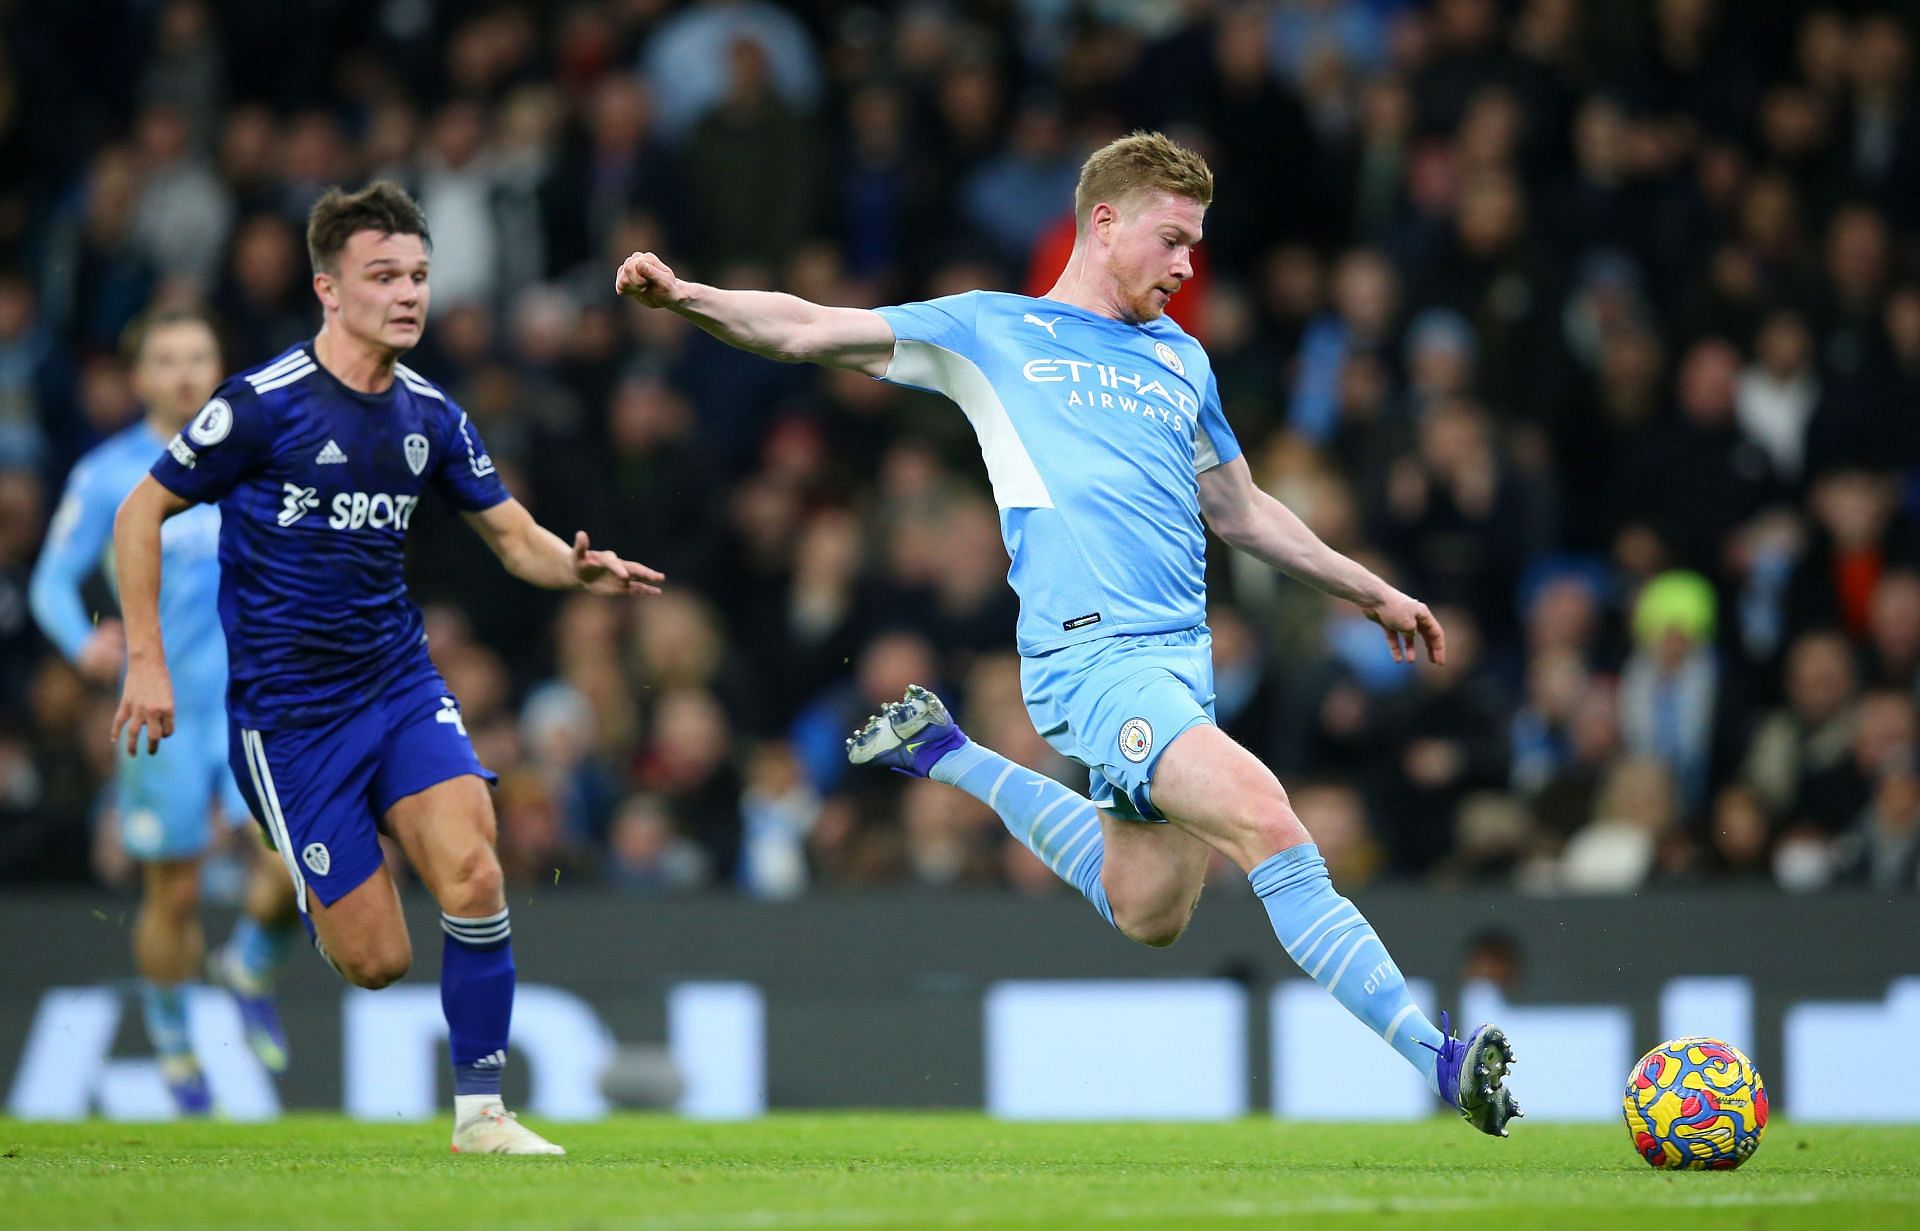 Manchester City take on Leeds United this weekend